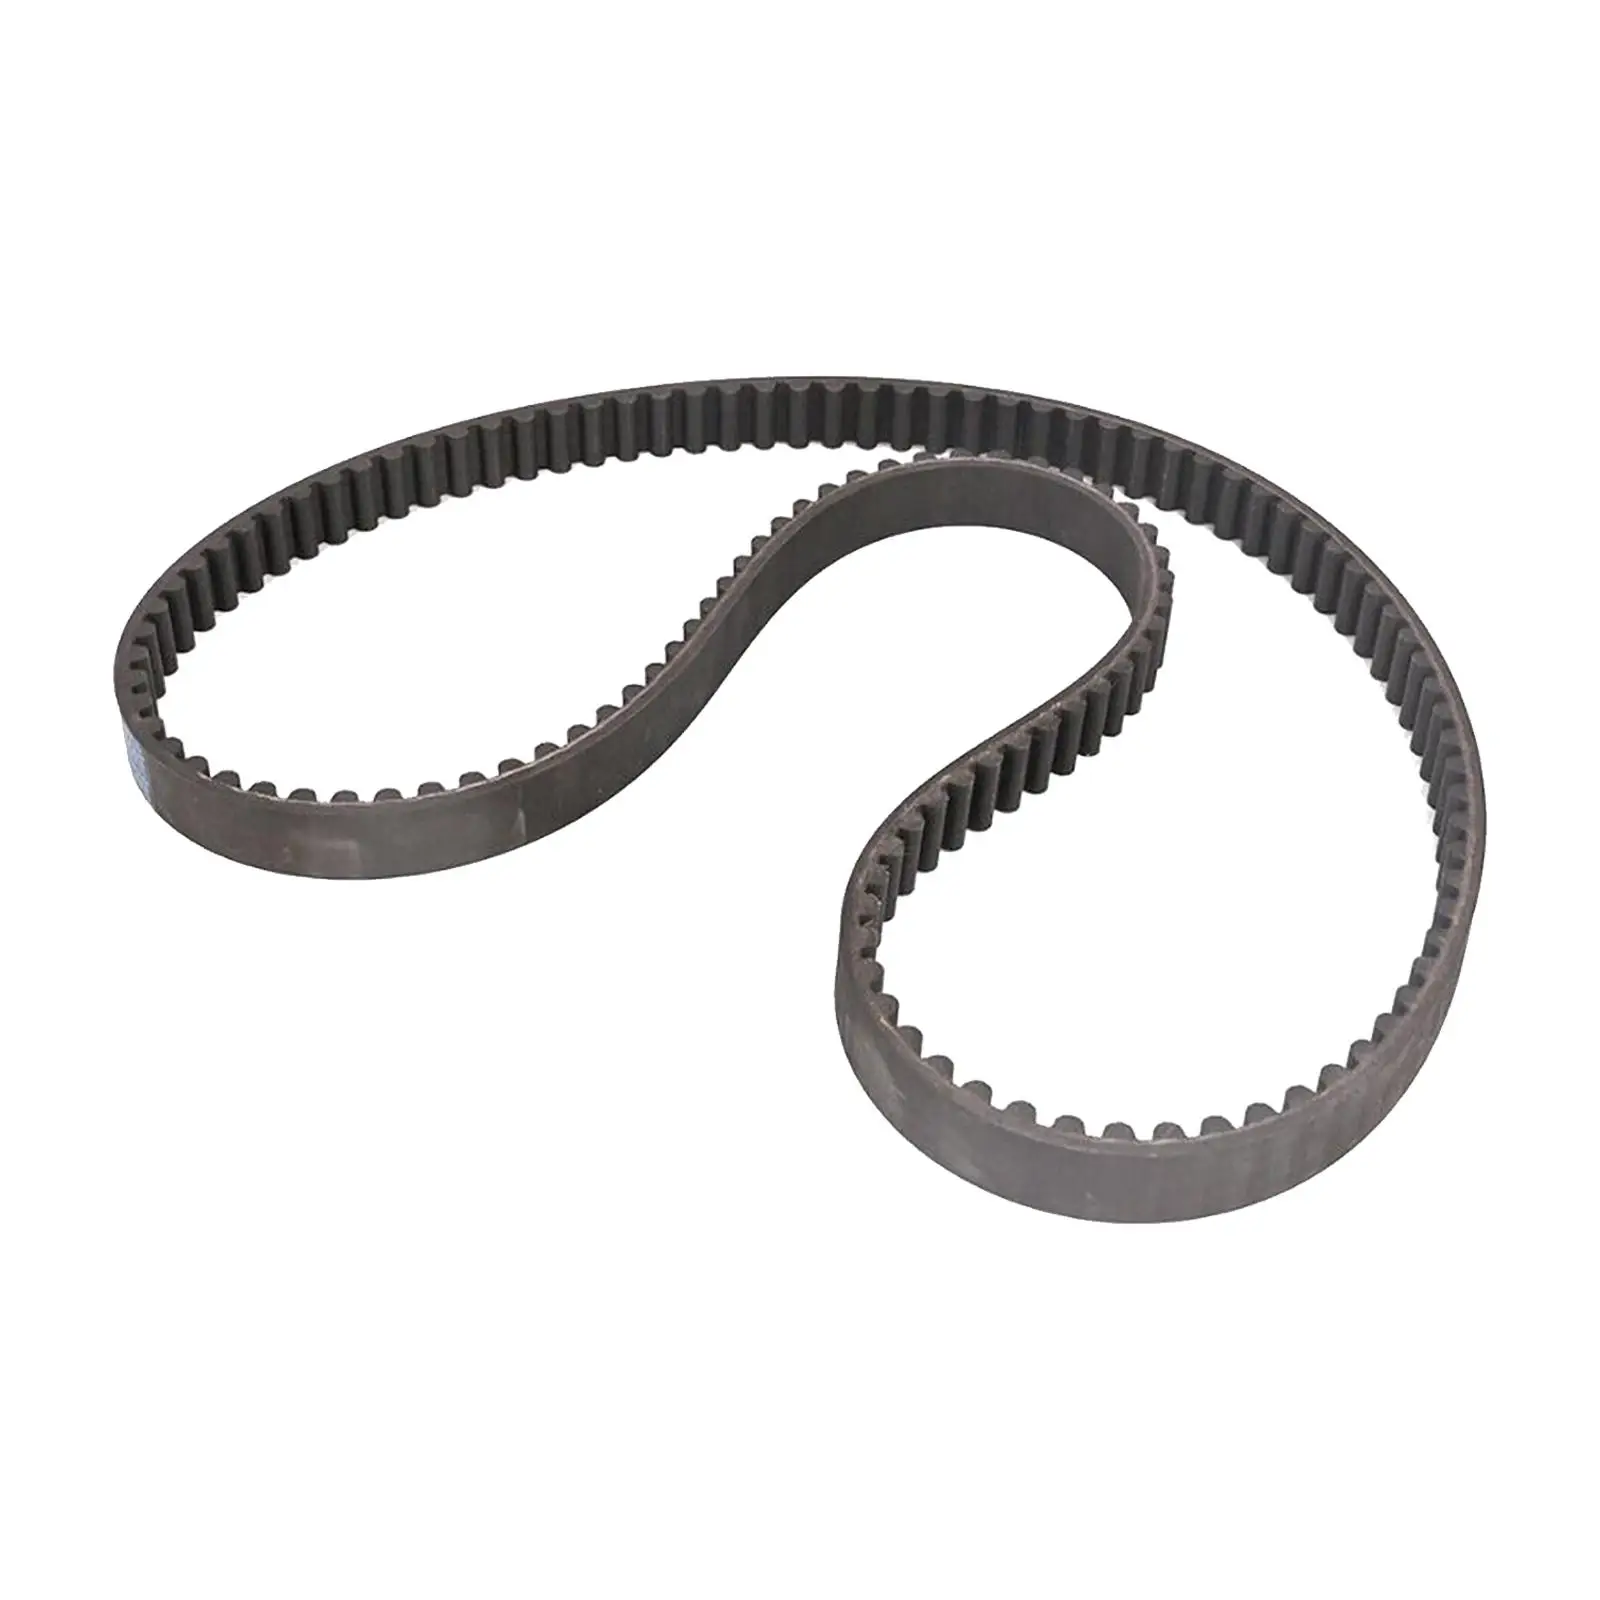 

Rear Drive Belt Rubber 1204-0043 58-416 1 1/2" 130 Tooth 40017-94 for Harley Flst Fatboy Repl Motorcycle Accessories Durable